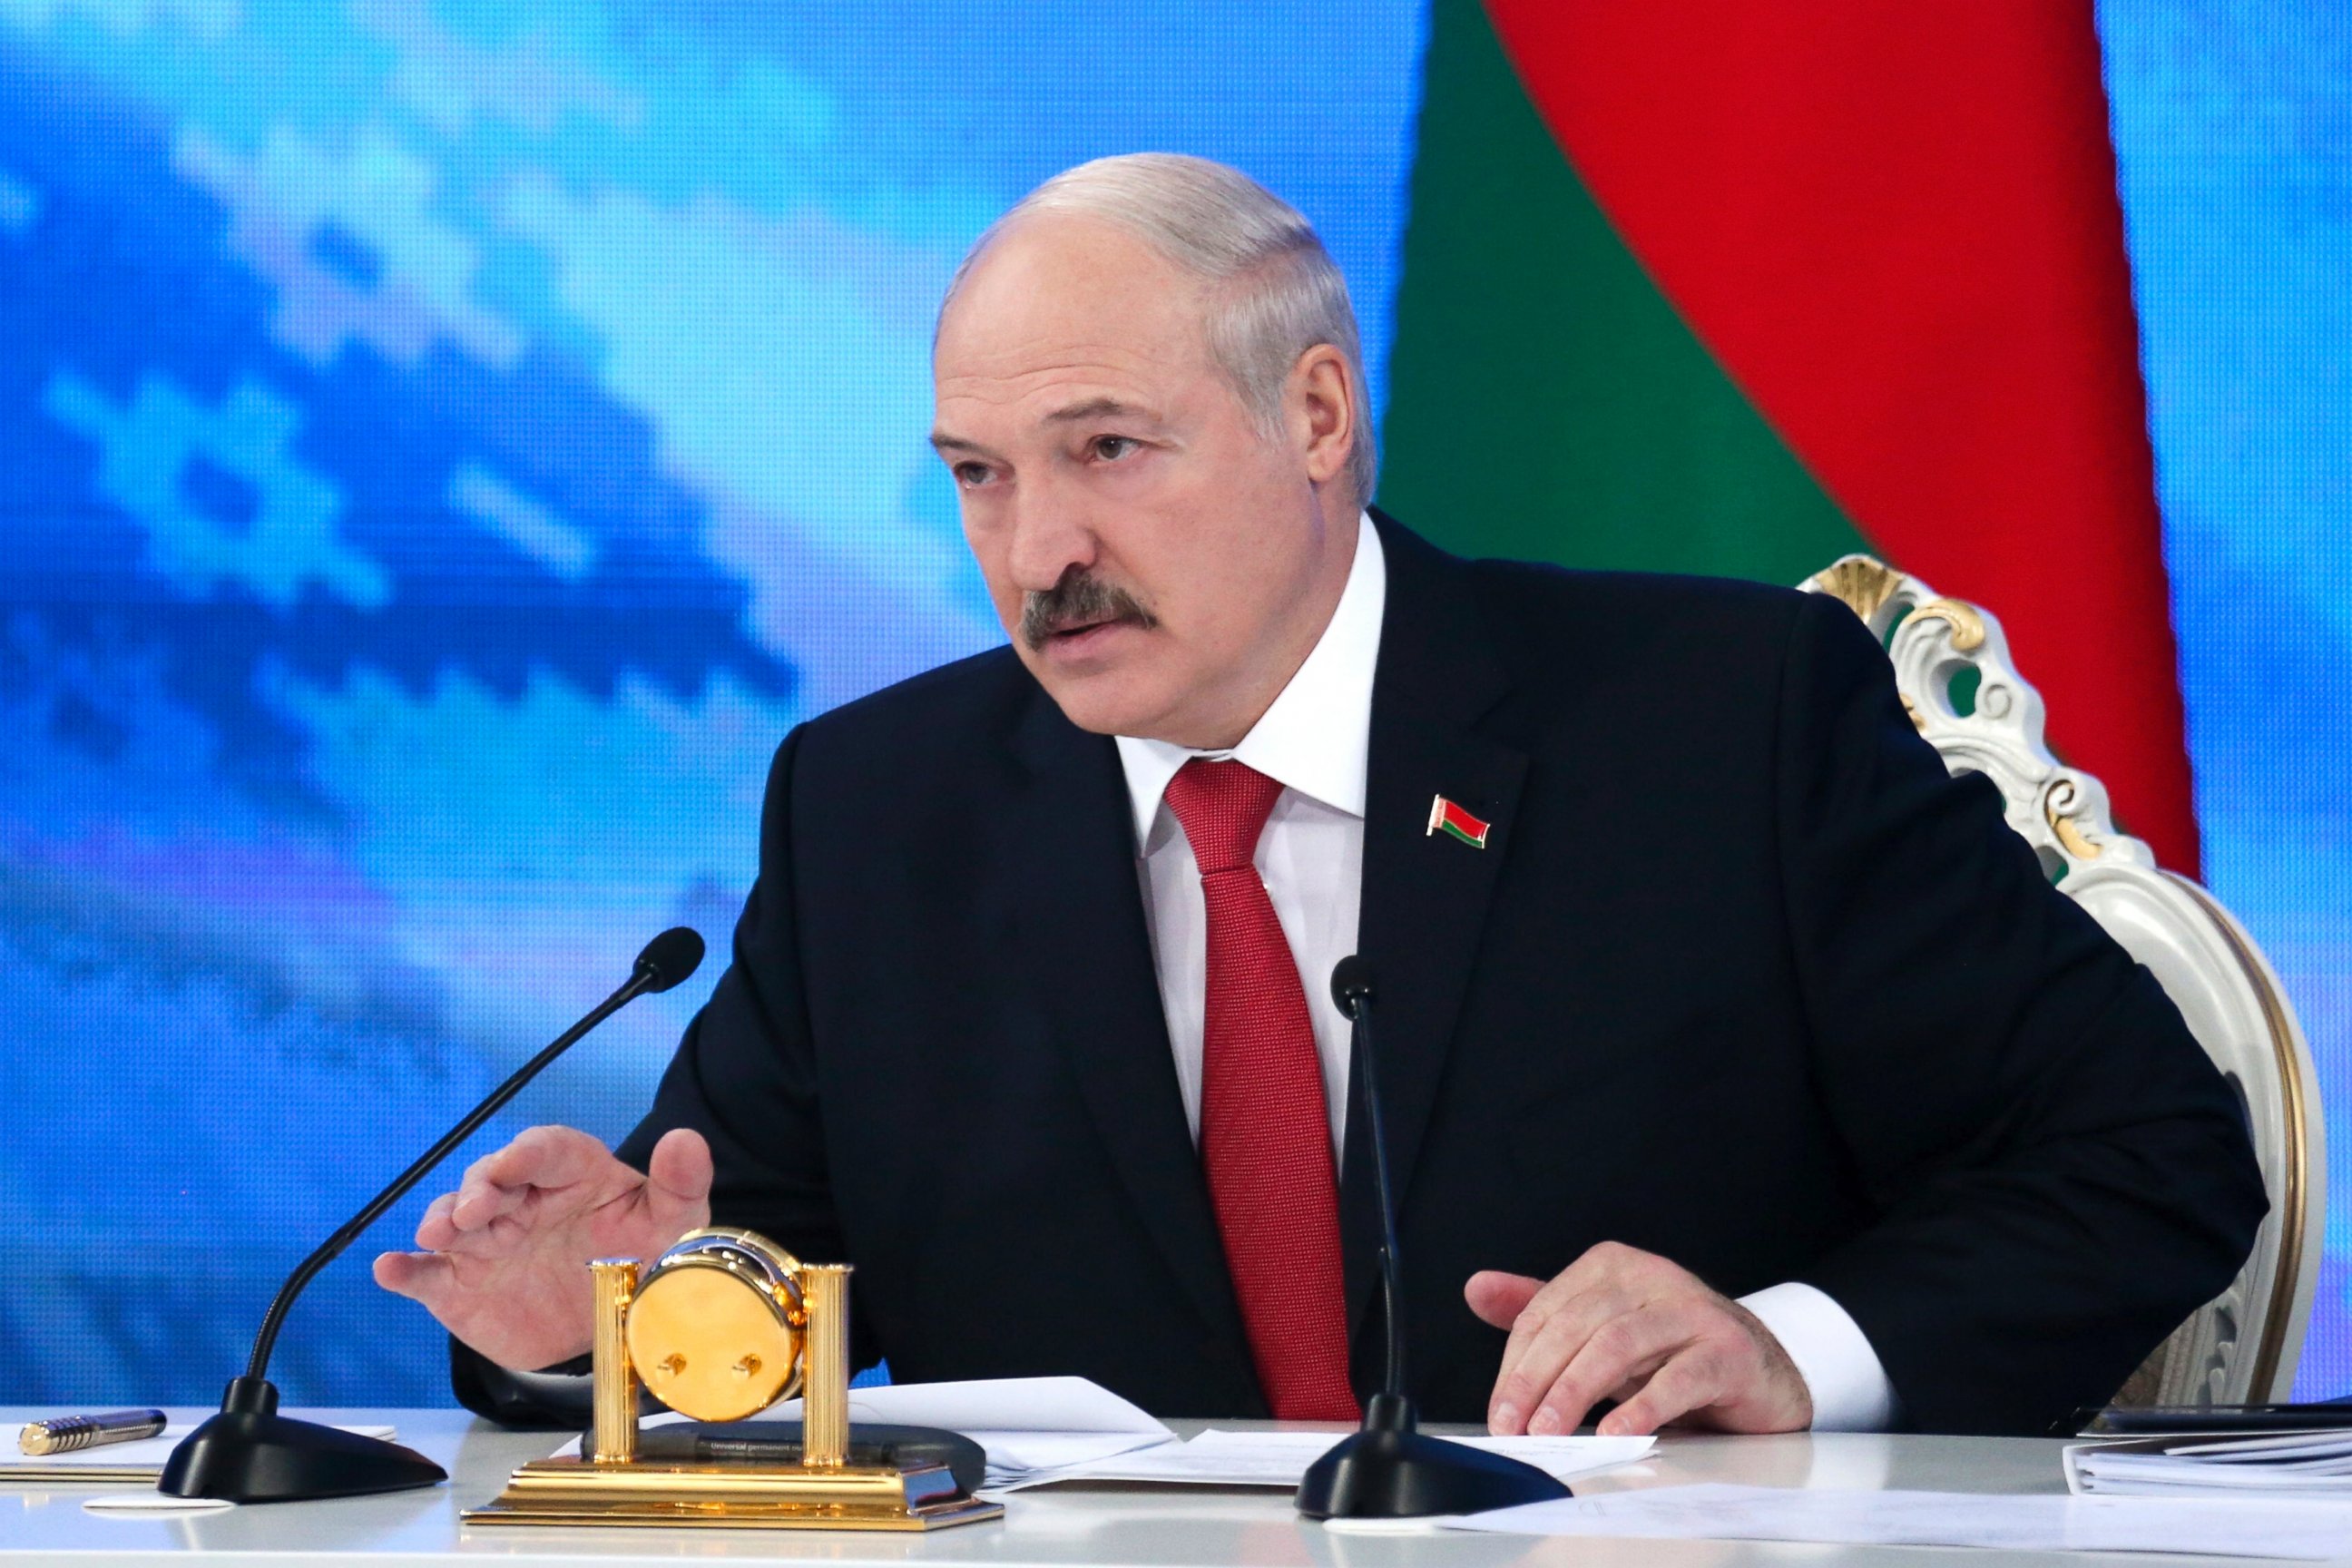 ICOs, Cryptocurrencies and Smart Contracts are Legalized in Belarus with Revolutionary Law